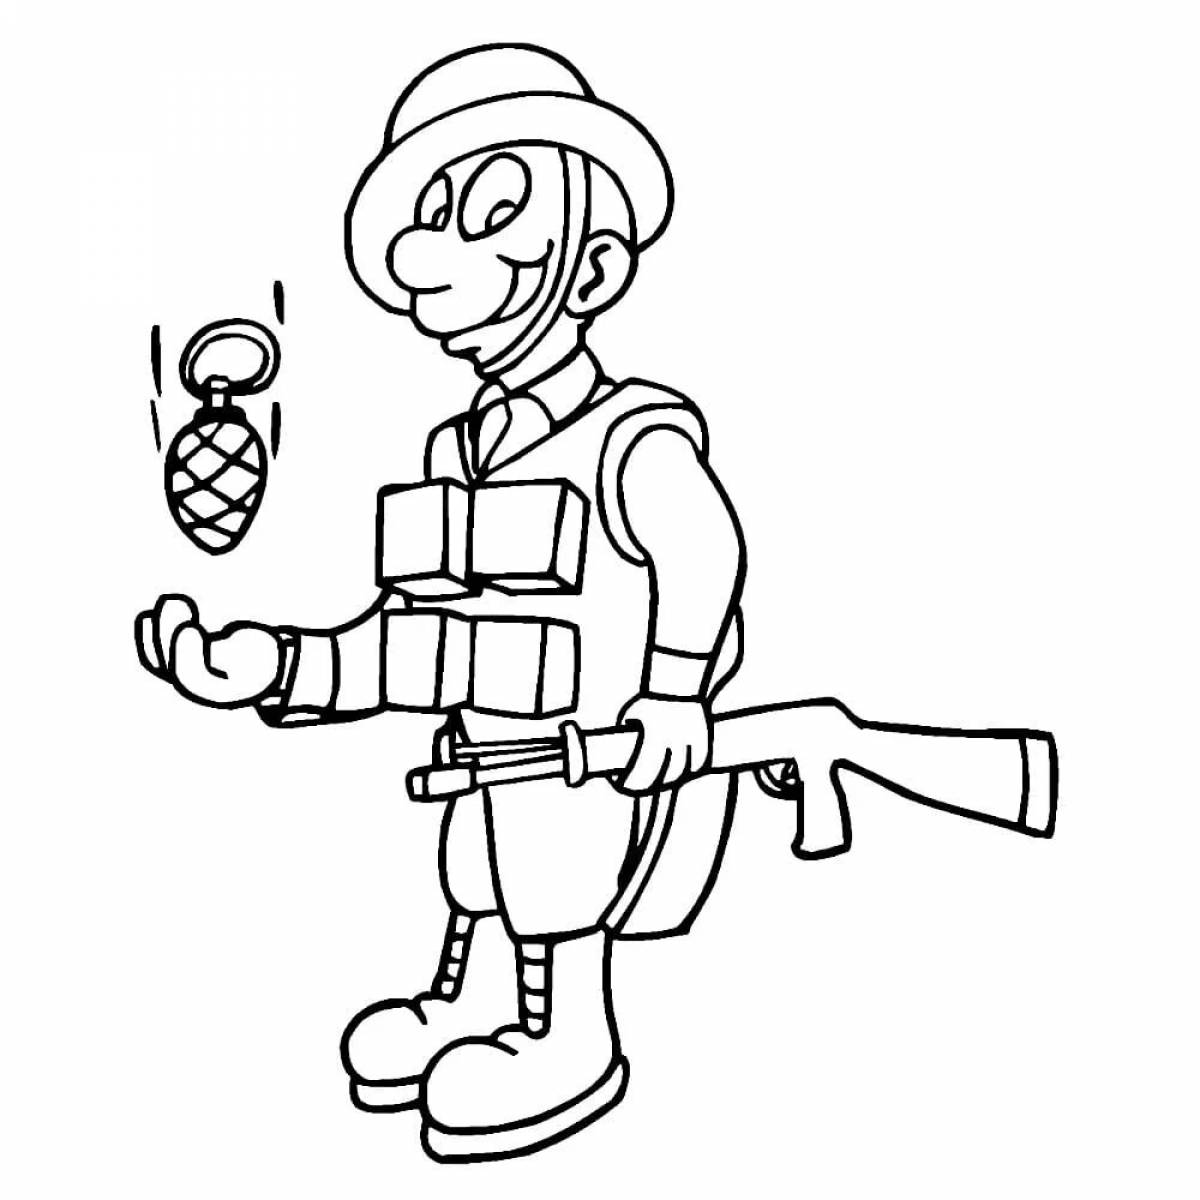 Soldier drawing for kids #4